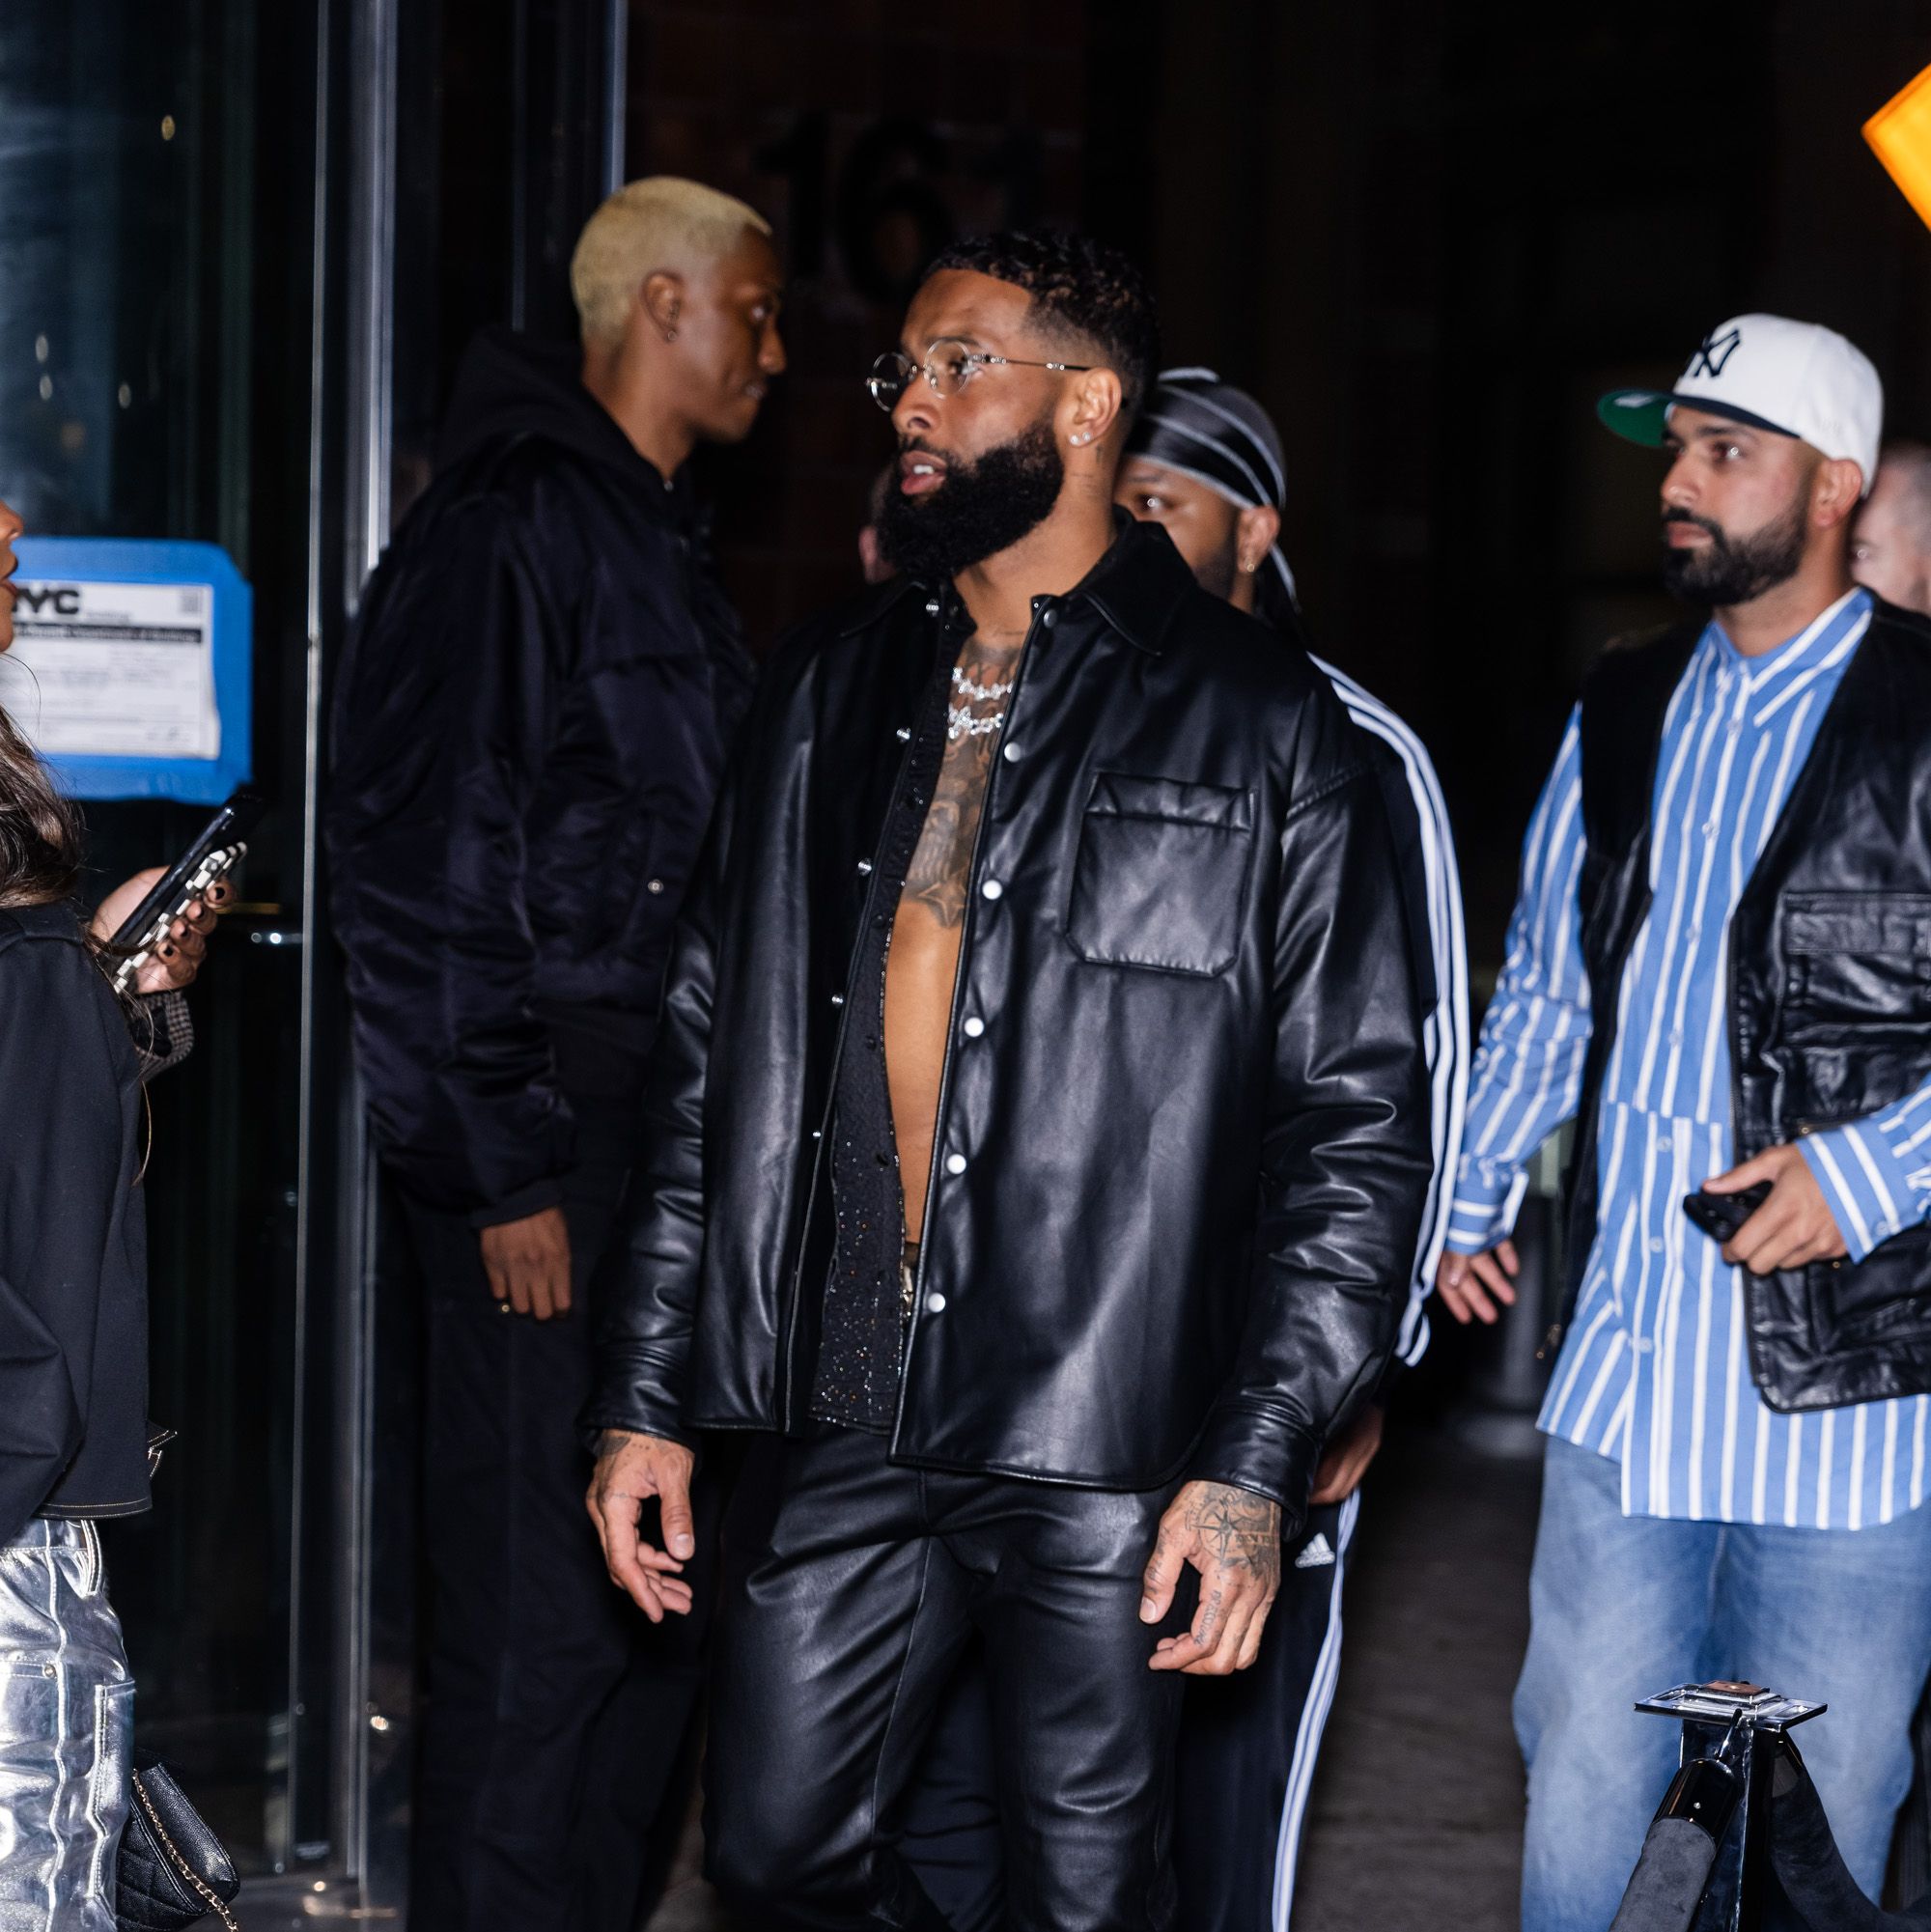 Apparently Celebs Called Each Other to Talk Sh*t About Odell Beckham Jr.'s Party Invites